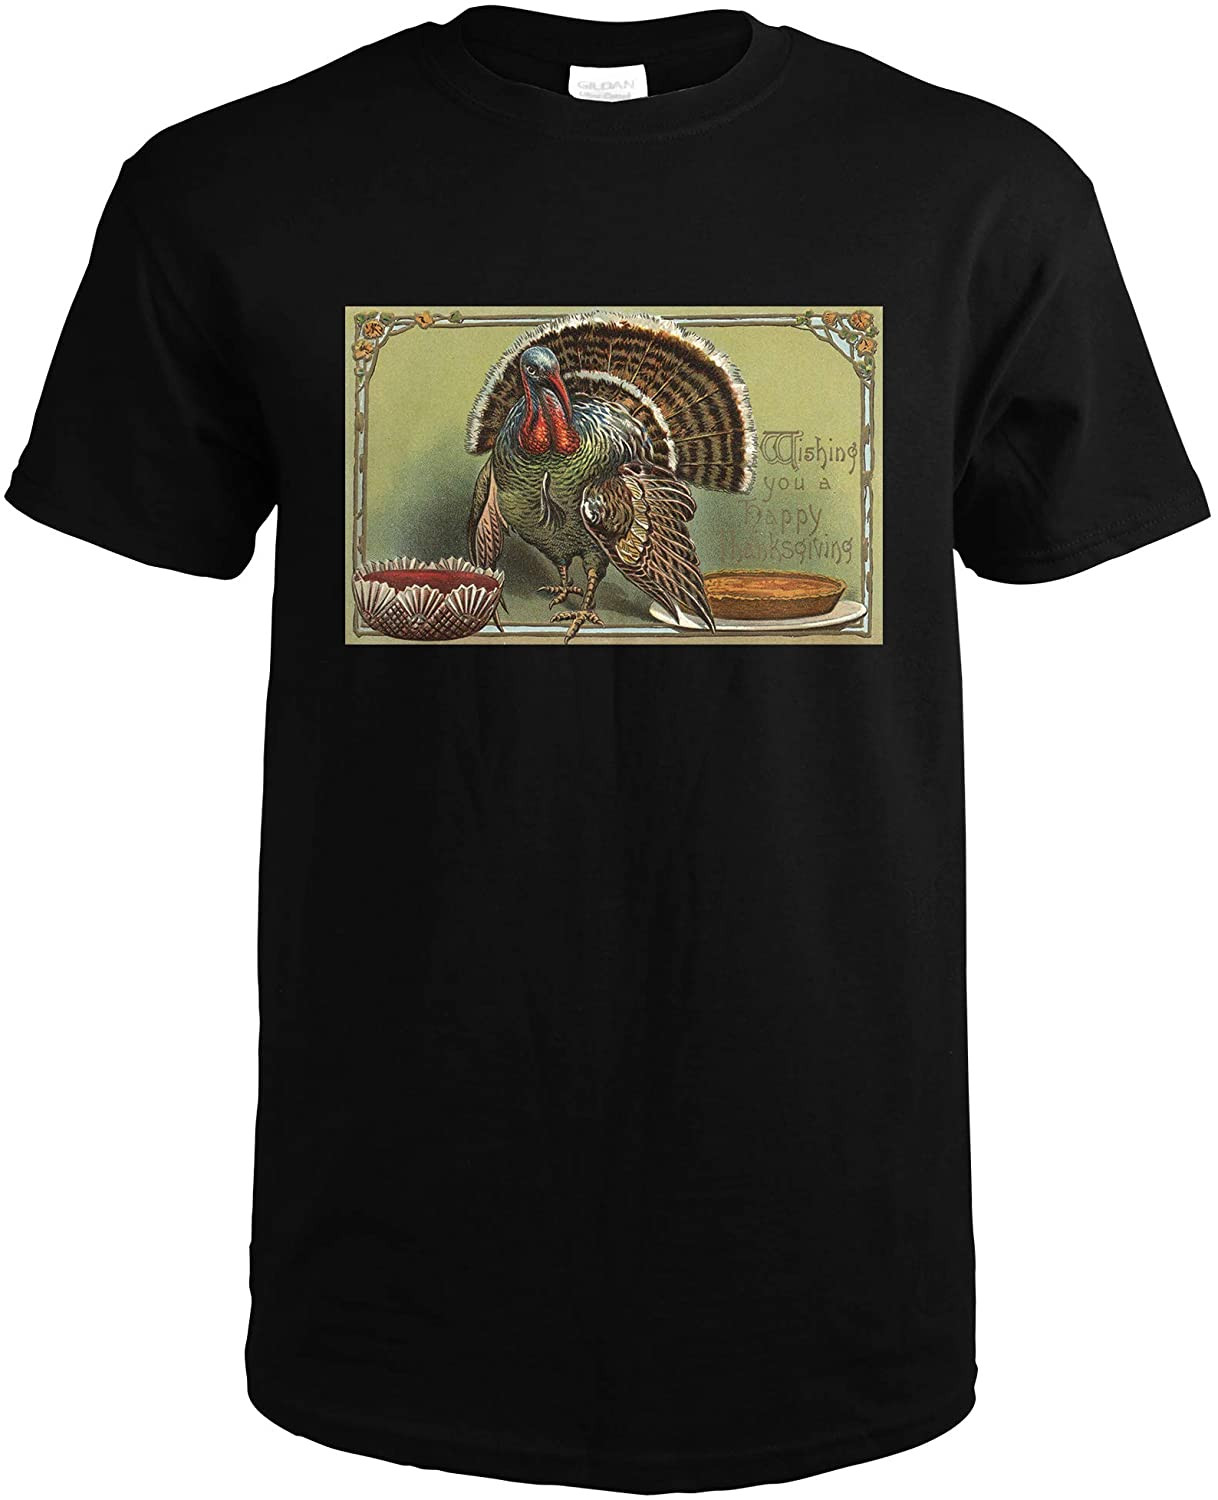 Wishing You A Happy Thanksgiving, Turkey By Punch And Pie (Premium T-Shirt